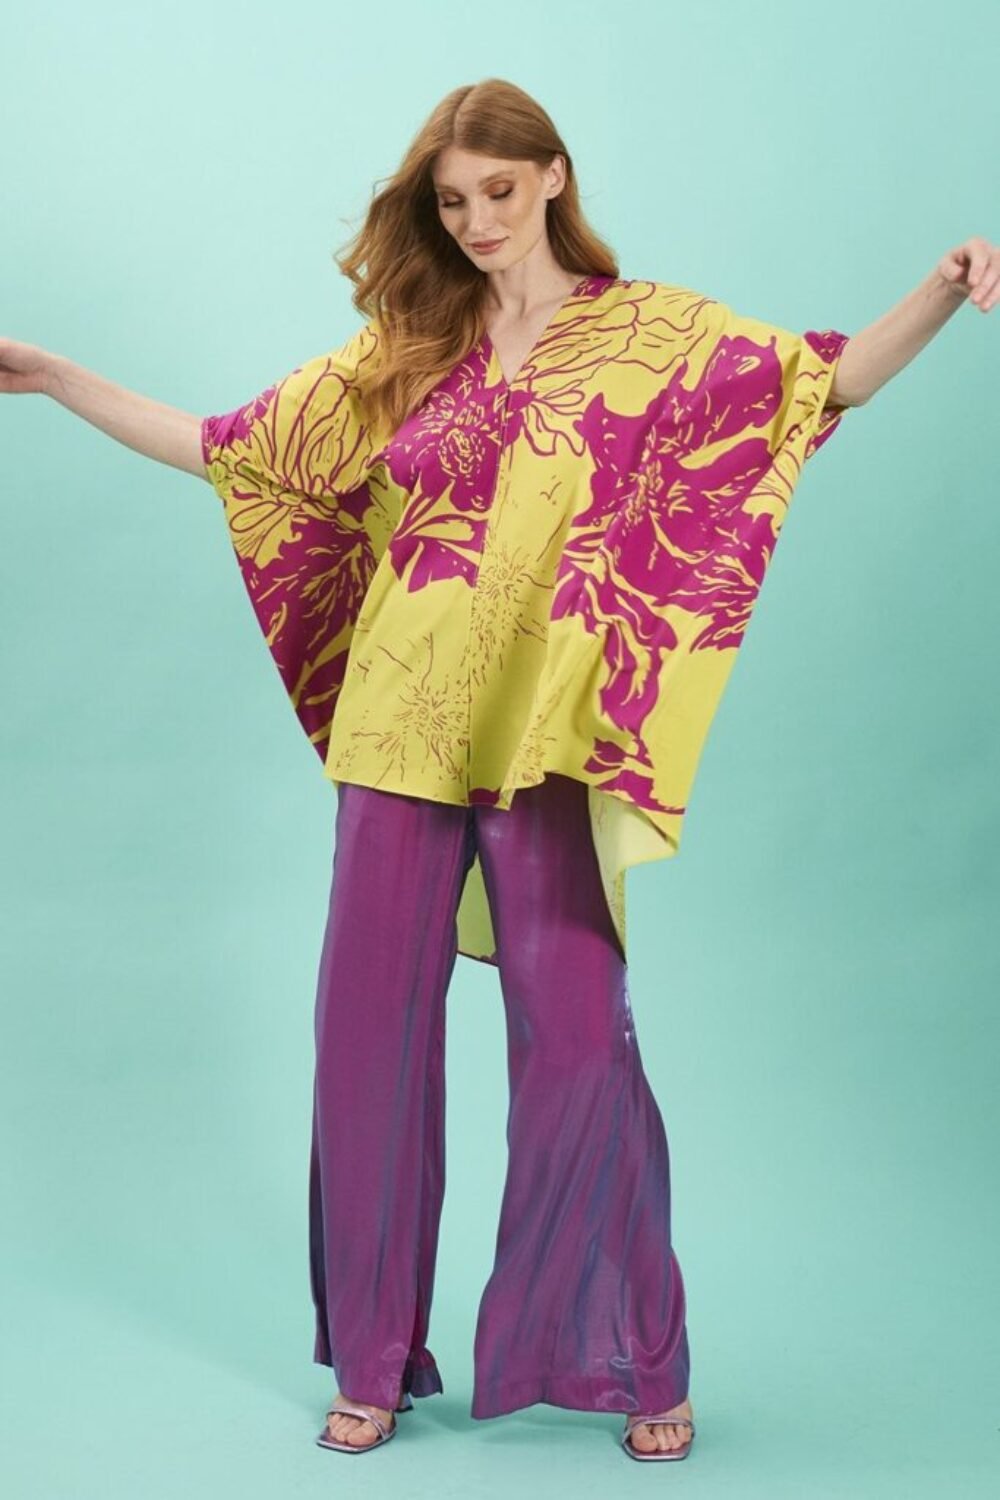 Shop Lux Rayon Blend Sienna Floral Kimono and women's luxury and designer clothes at www.lux-apparel.co.uk